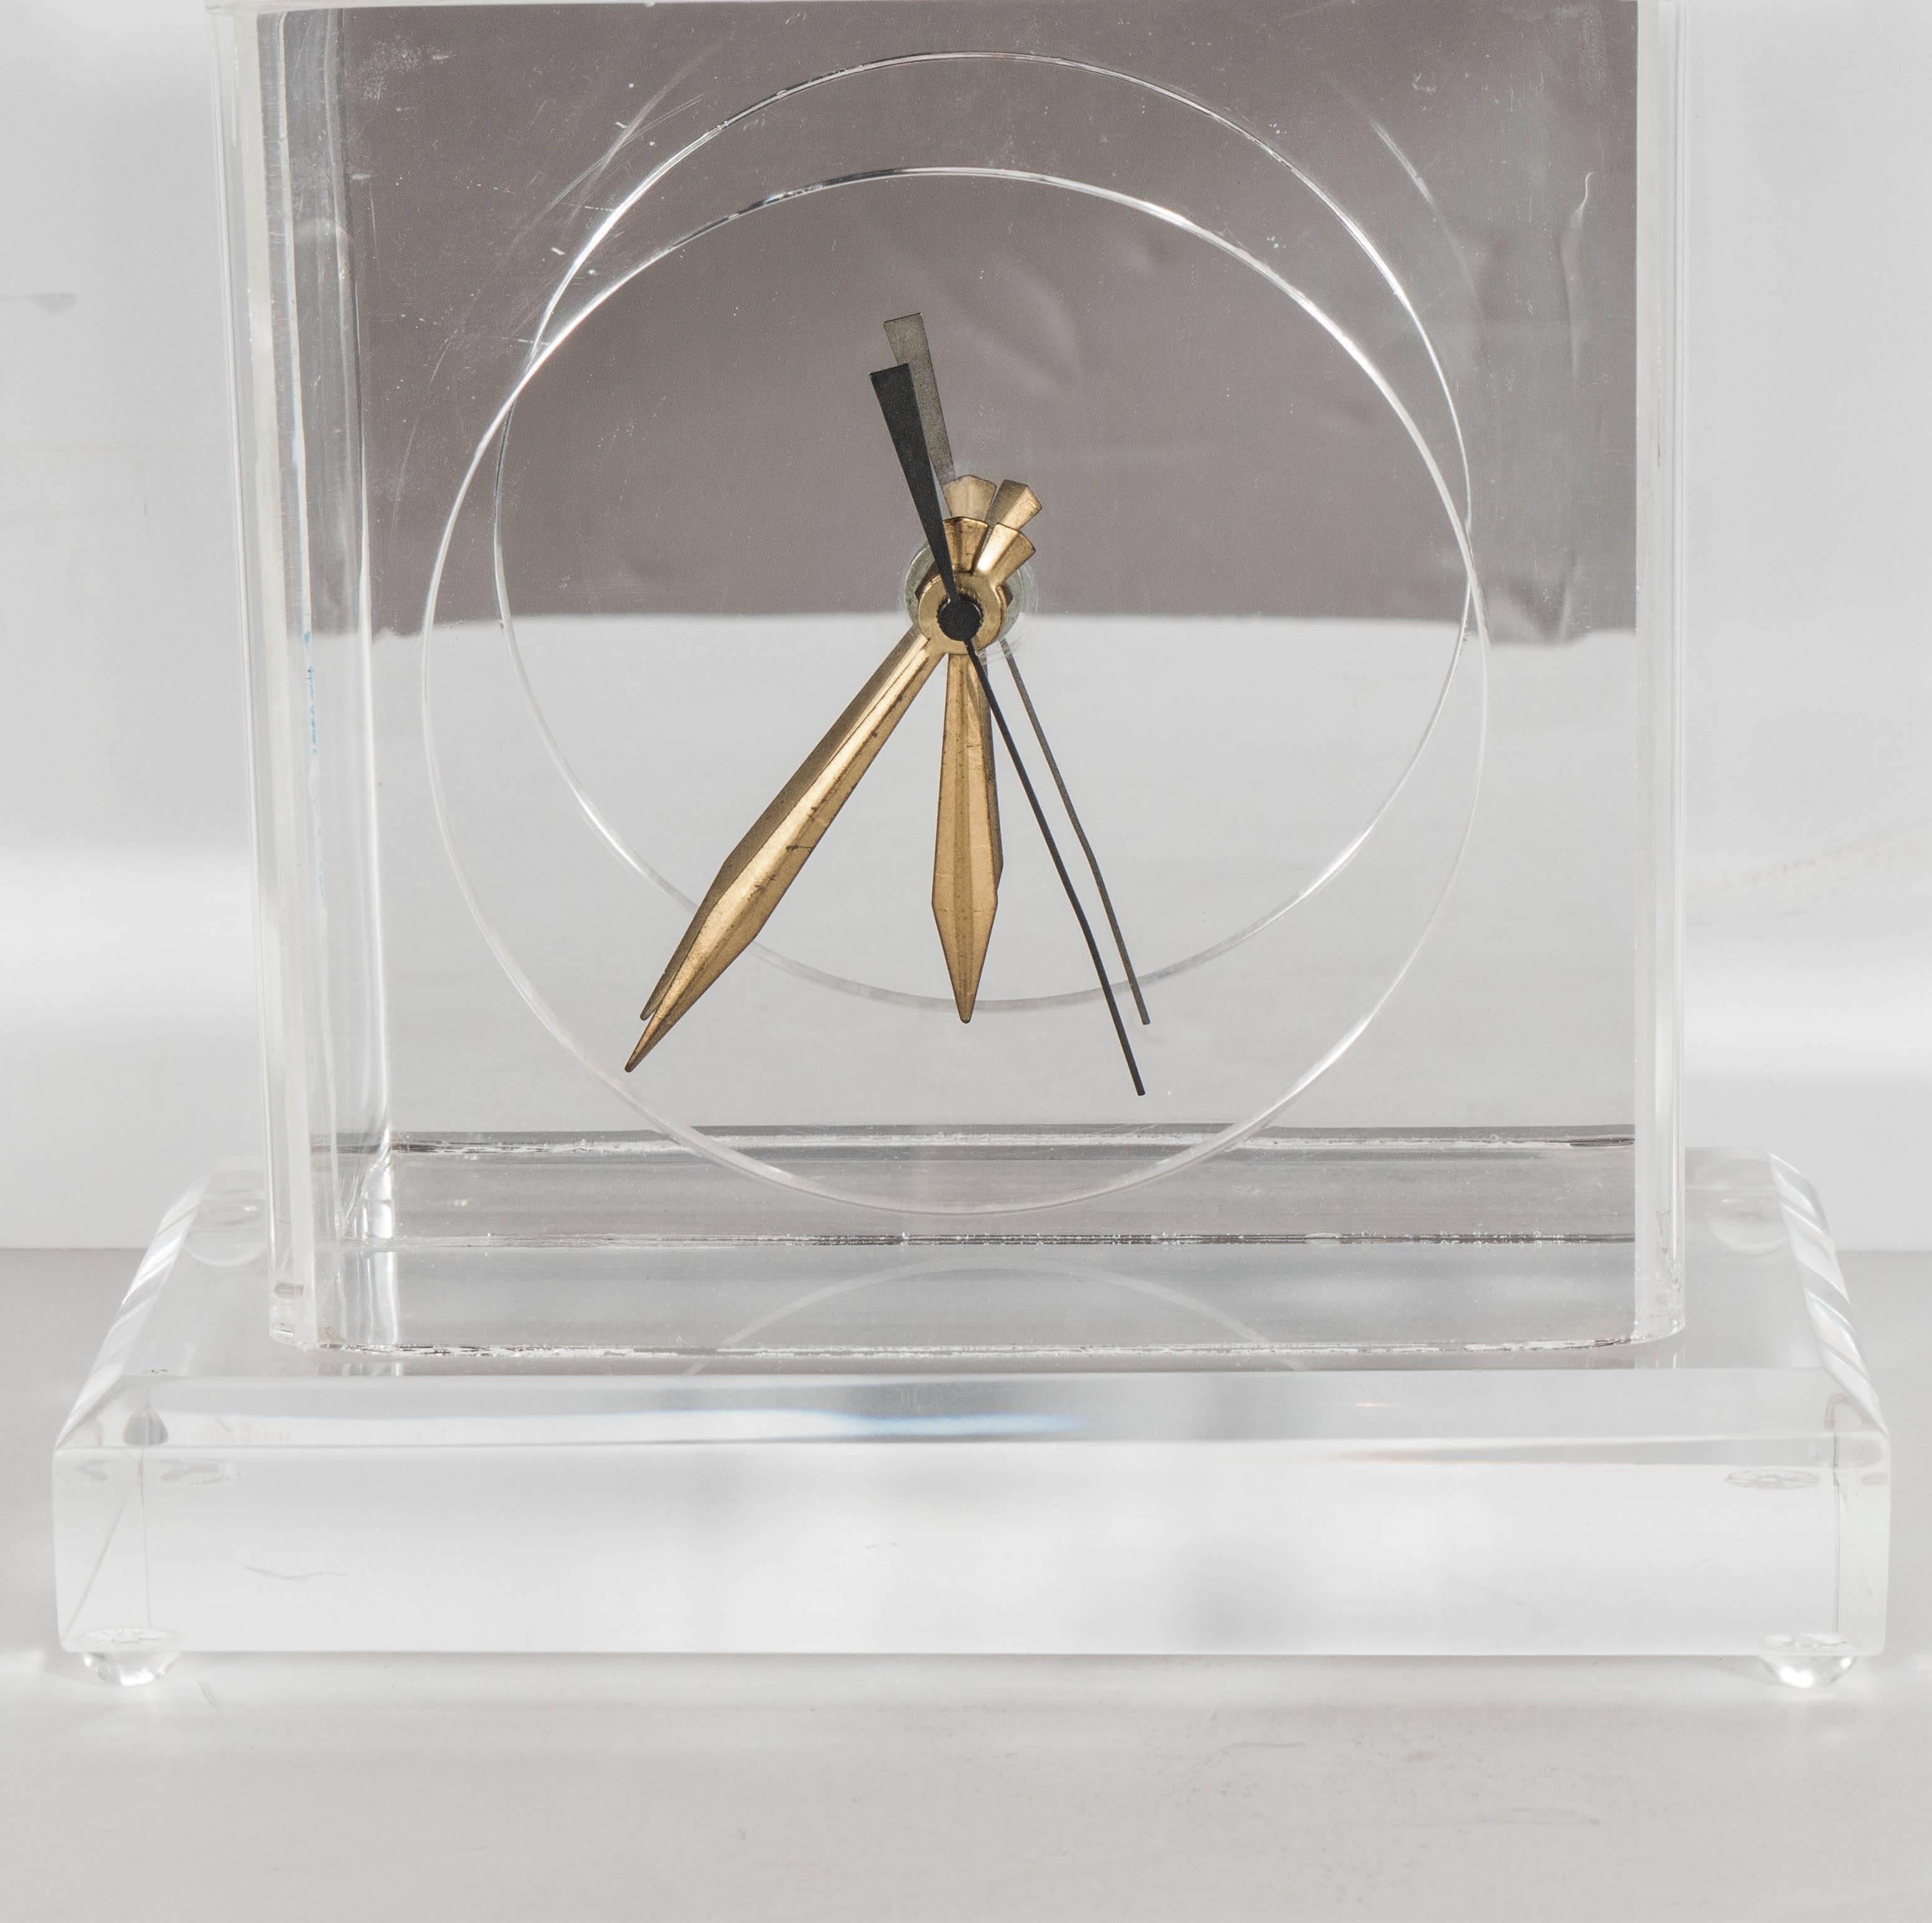 A chic Mid-Century Modernist desk or table clock. A thick-beveled Lucite plinth supports a molded Lucite frame, which holds a mirrored-back clock with brass arms. A simple and elegant design. This piece is in excellent condition.